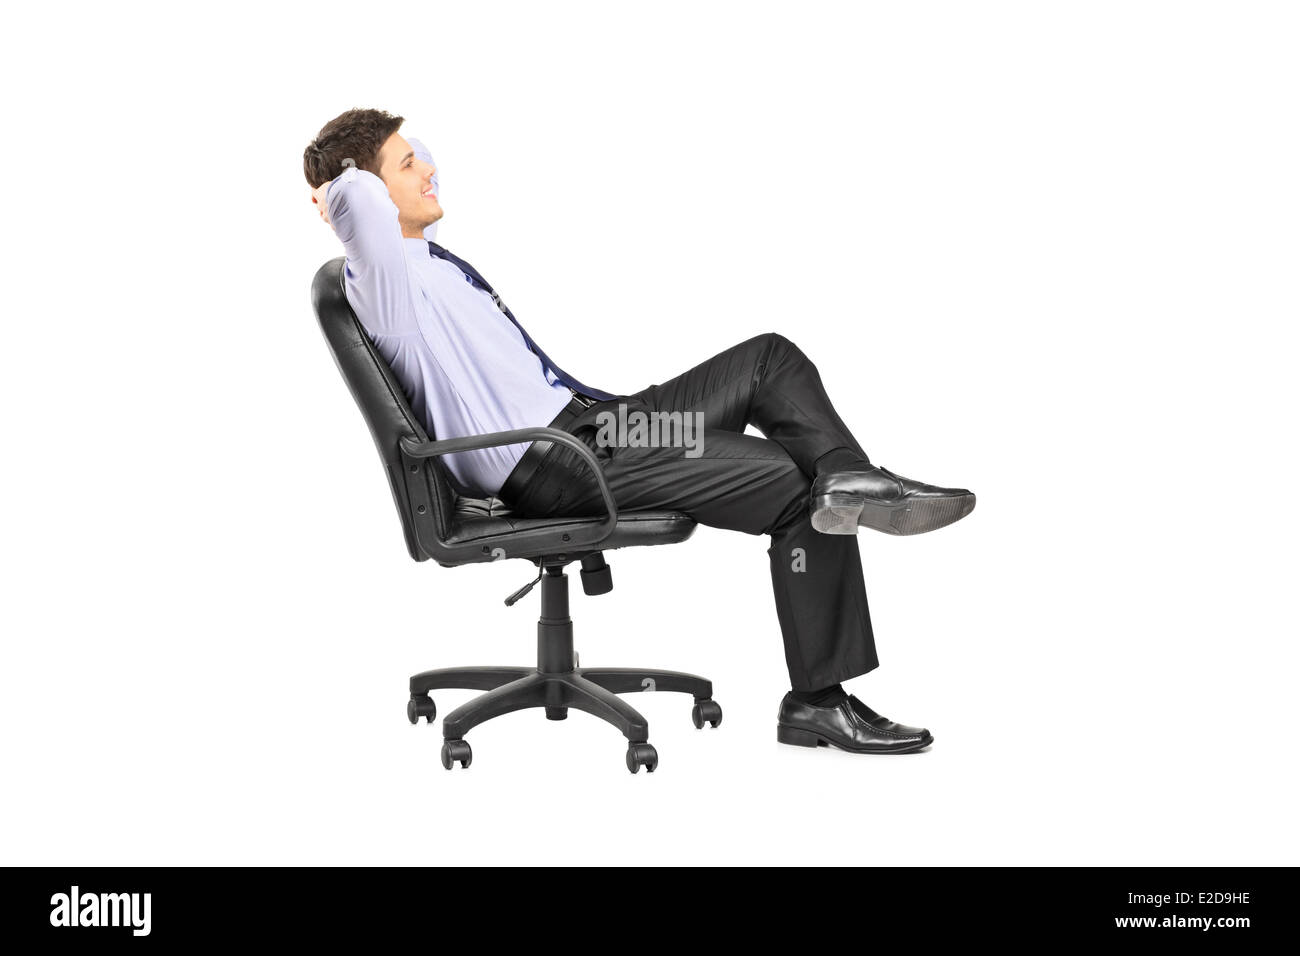 Relaxed man sitting in an office chair Stock Photo